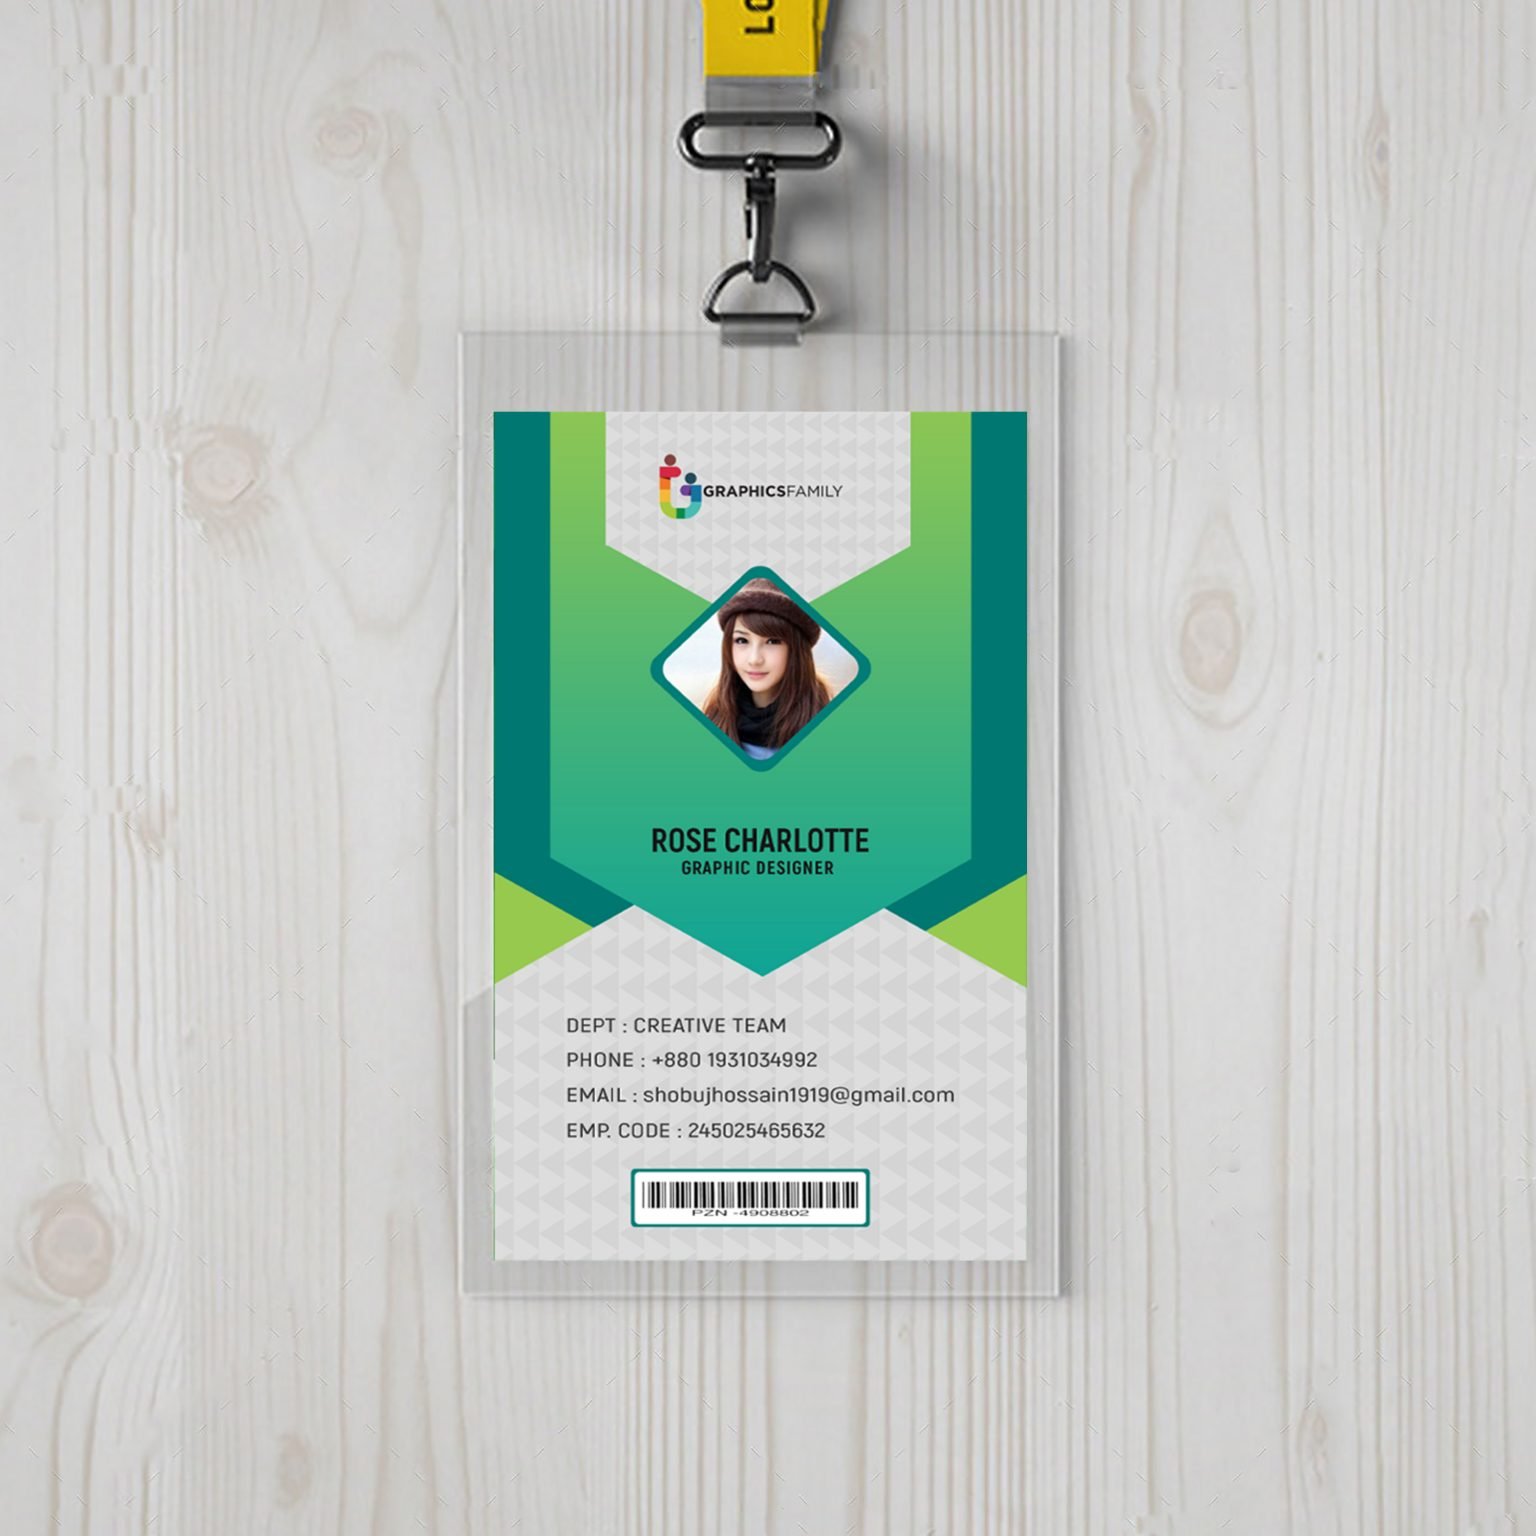 id card design photoshop free download